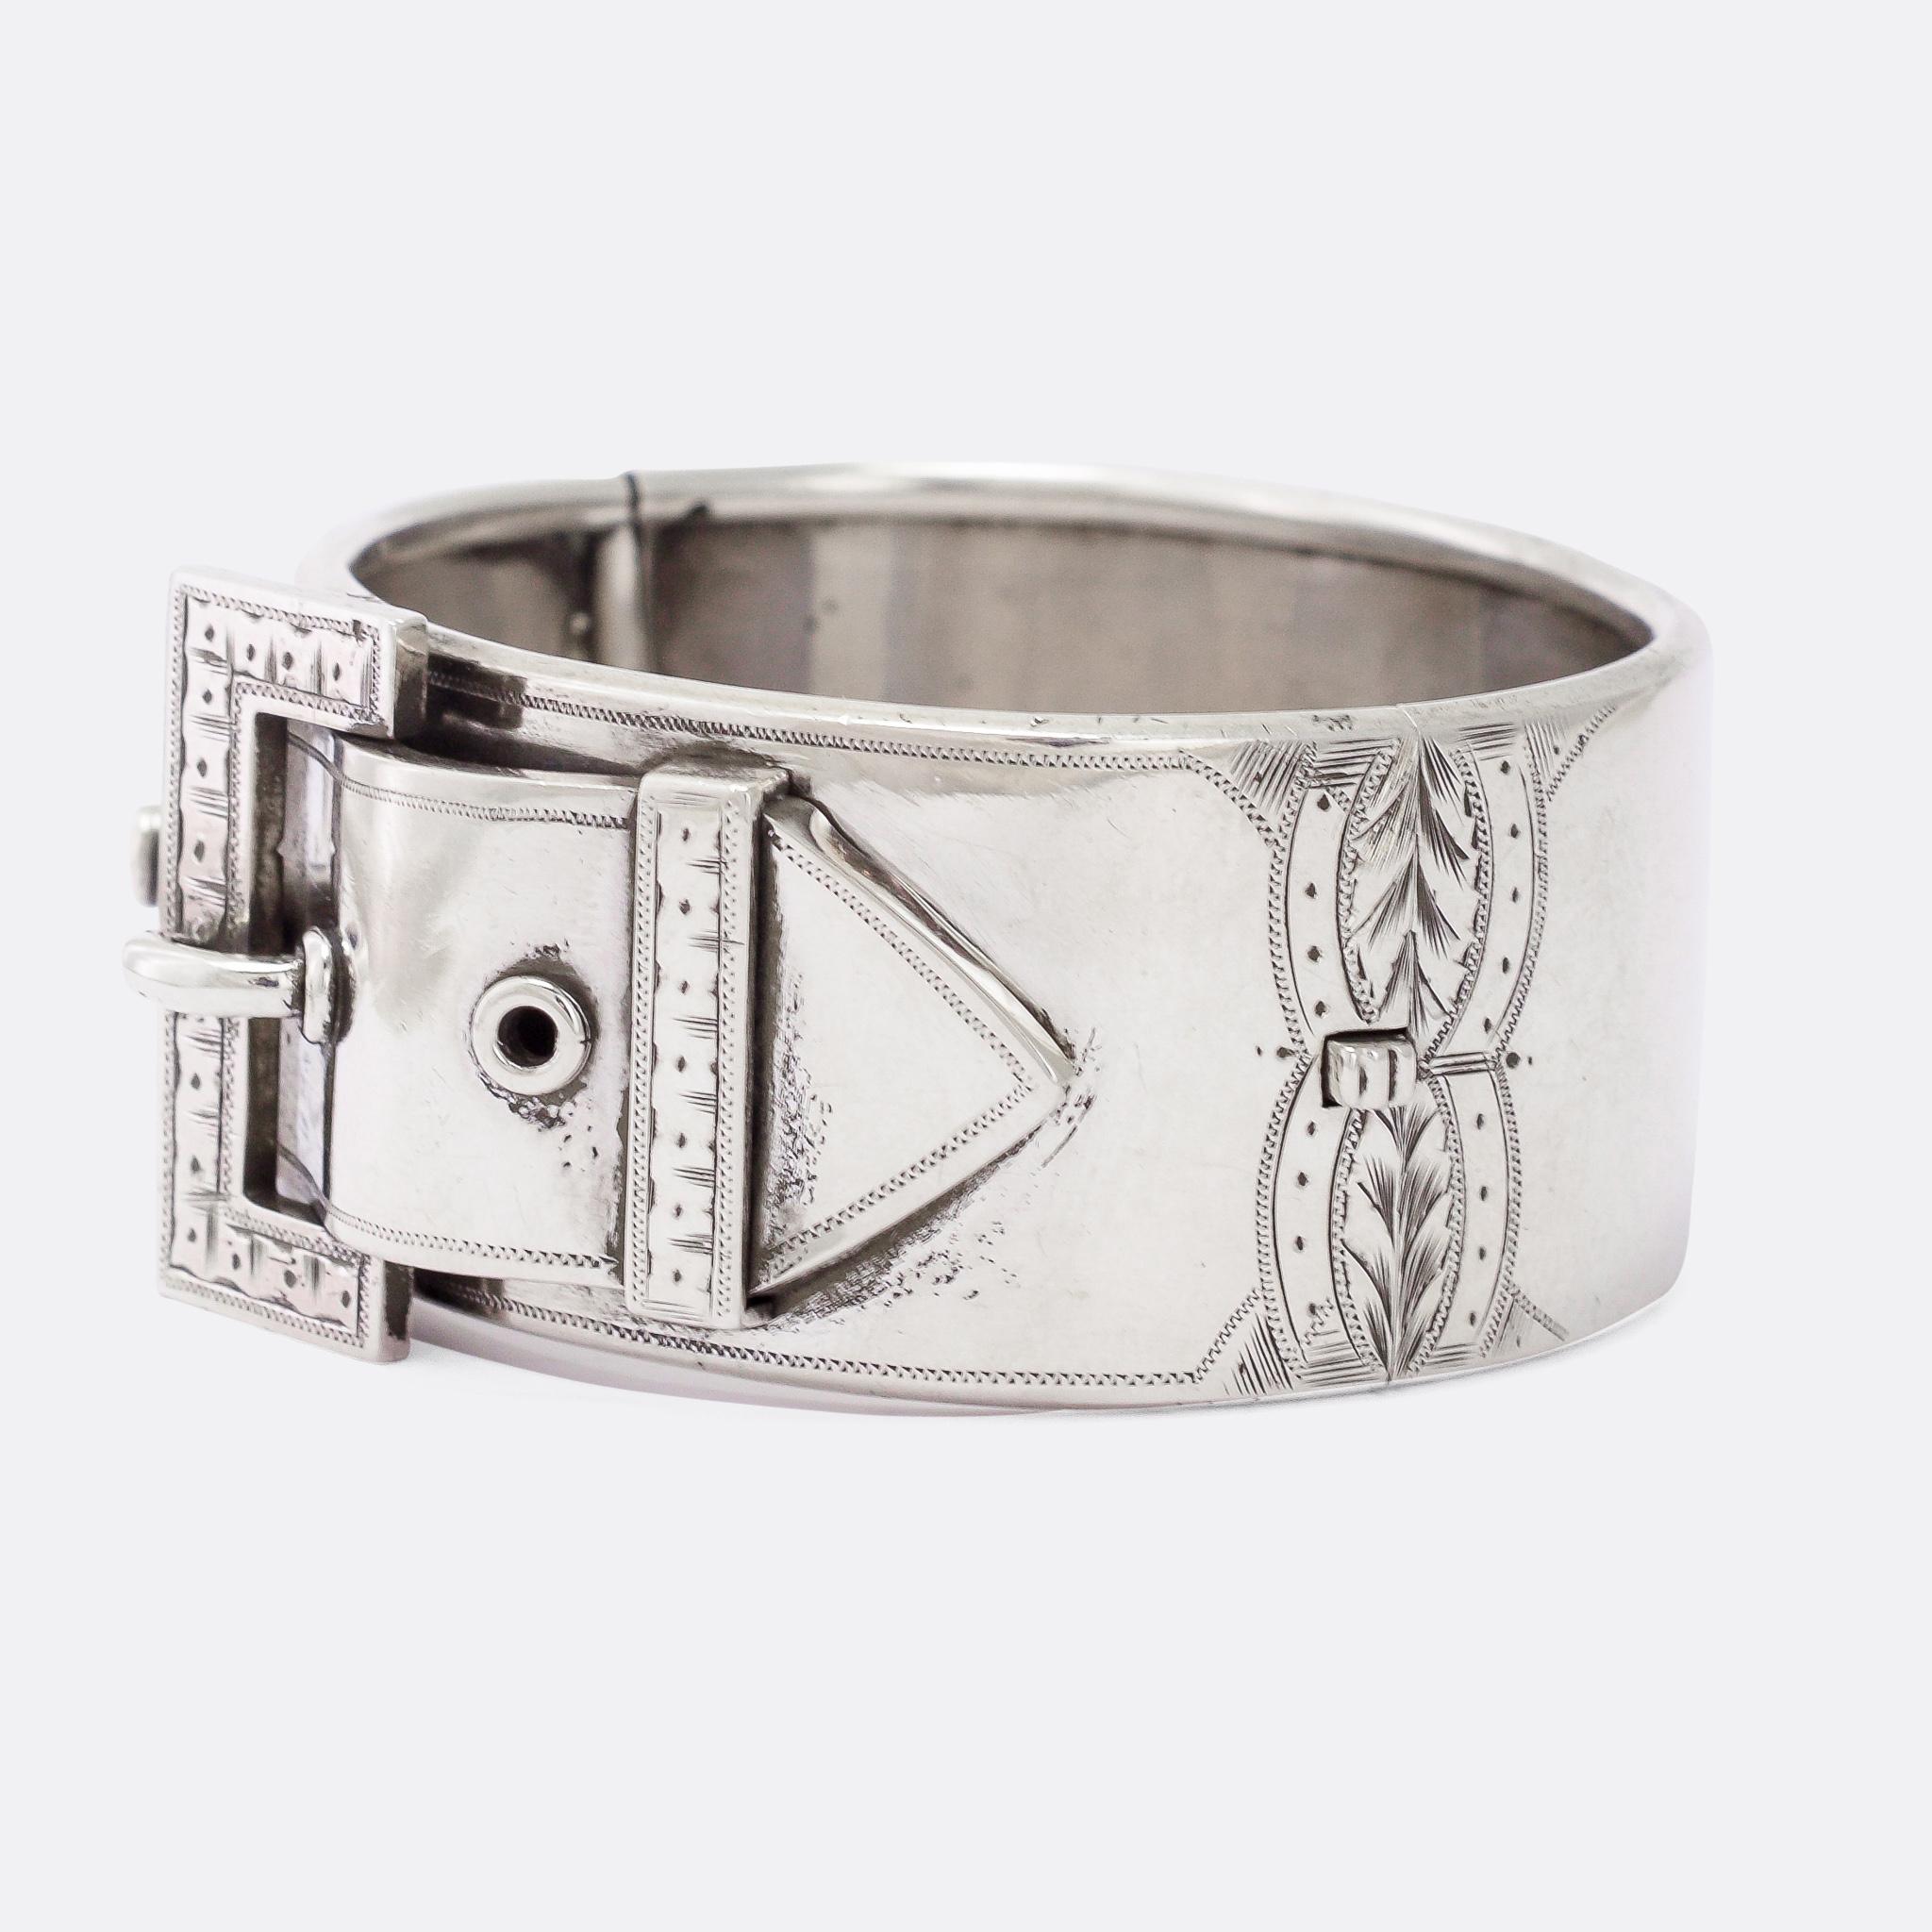 A gorgeous, chunky cuff bangle with a large buckle and strap motif. It dates from the Victorian period - circa 1880 - crafted in Sterling silver throughout. The buckle motif was popular in Victorian jewellery, with Queen Victoria herself said to